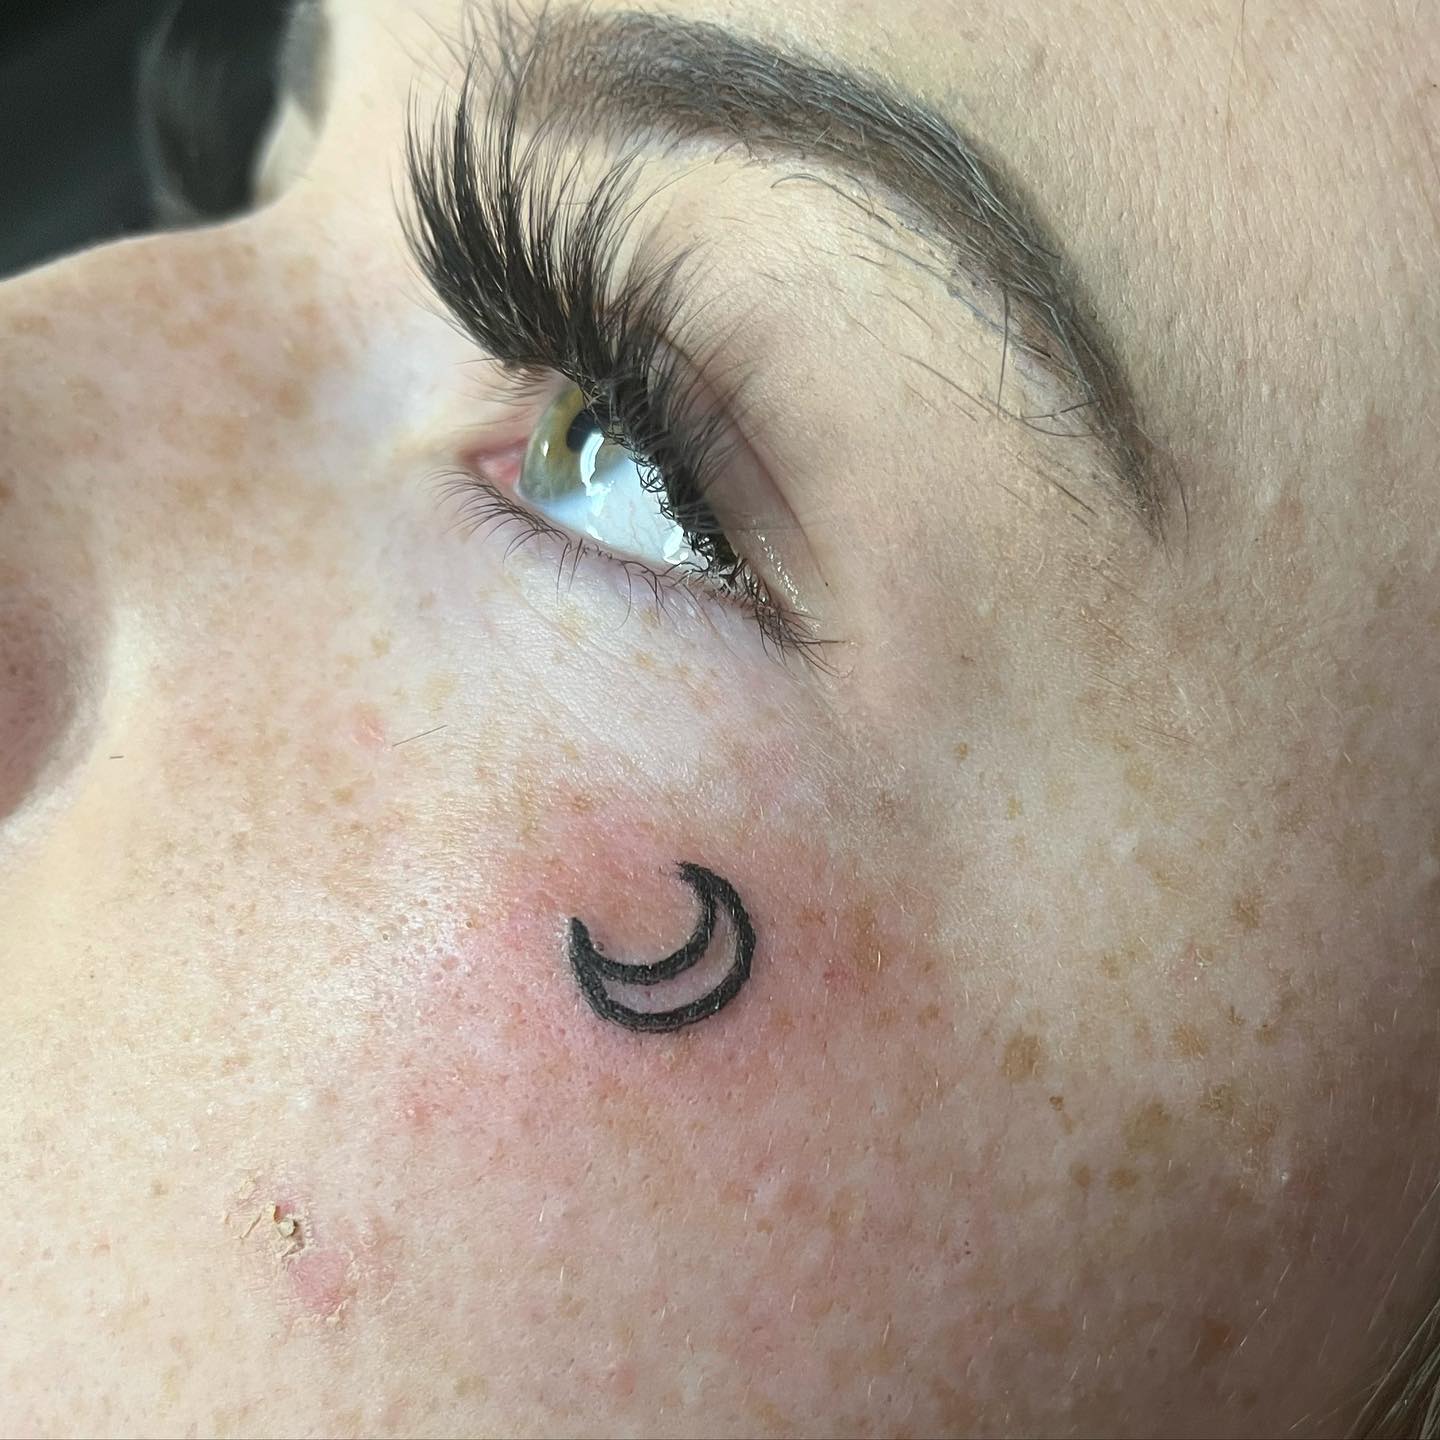 A small moon shape underneath your eye and on your cheek will symbolize your beliefs and how strong they truly are. You may even look like a mystical and spiritual person with this tattoo.